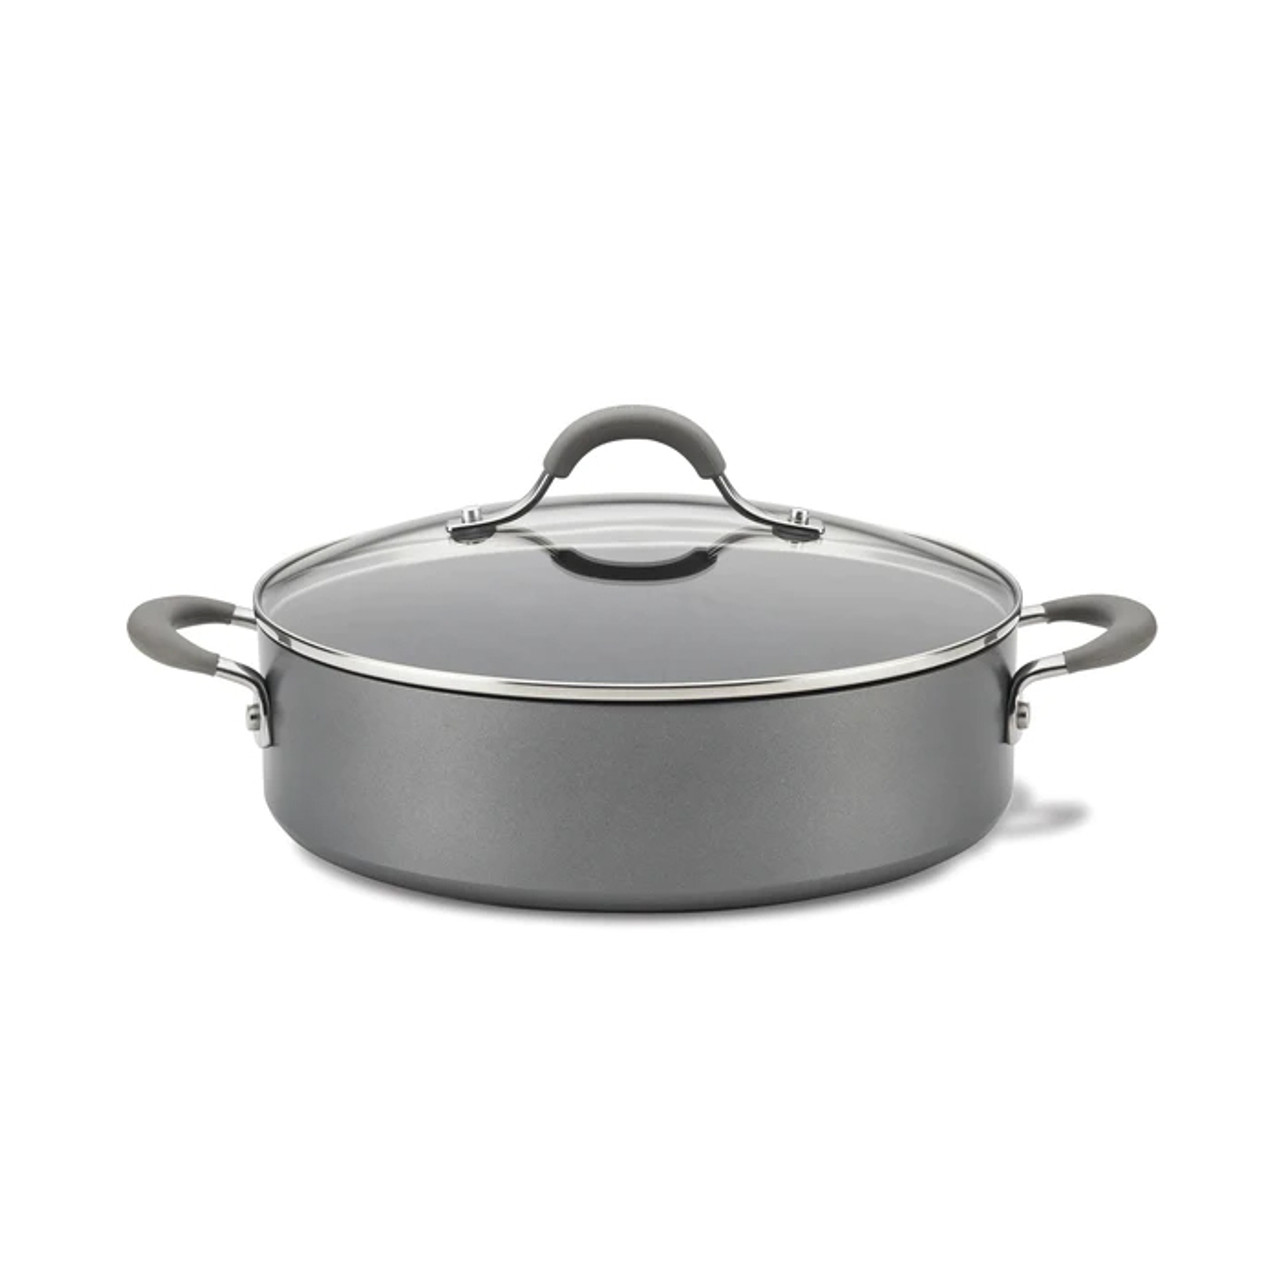 HARD ANODIZED NONSTICK 4-Qt. Covered Sauteuse